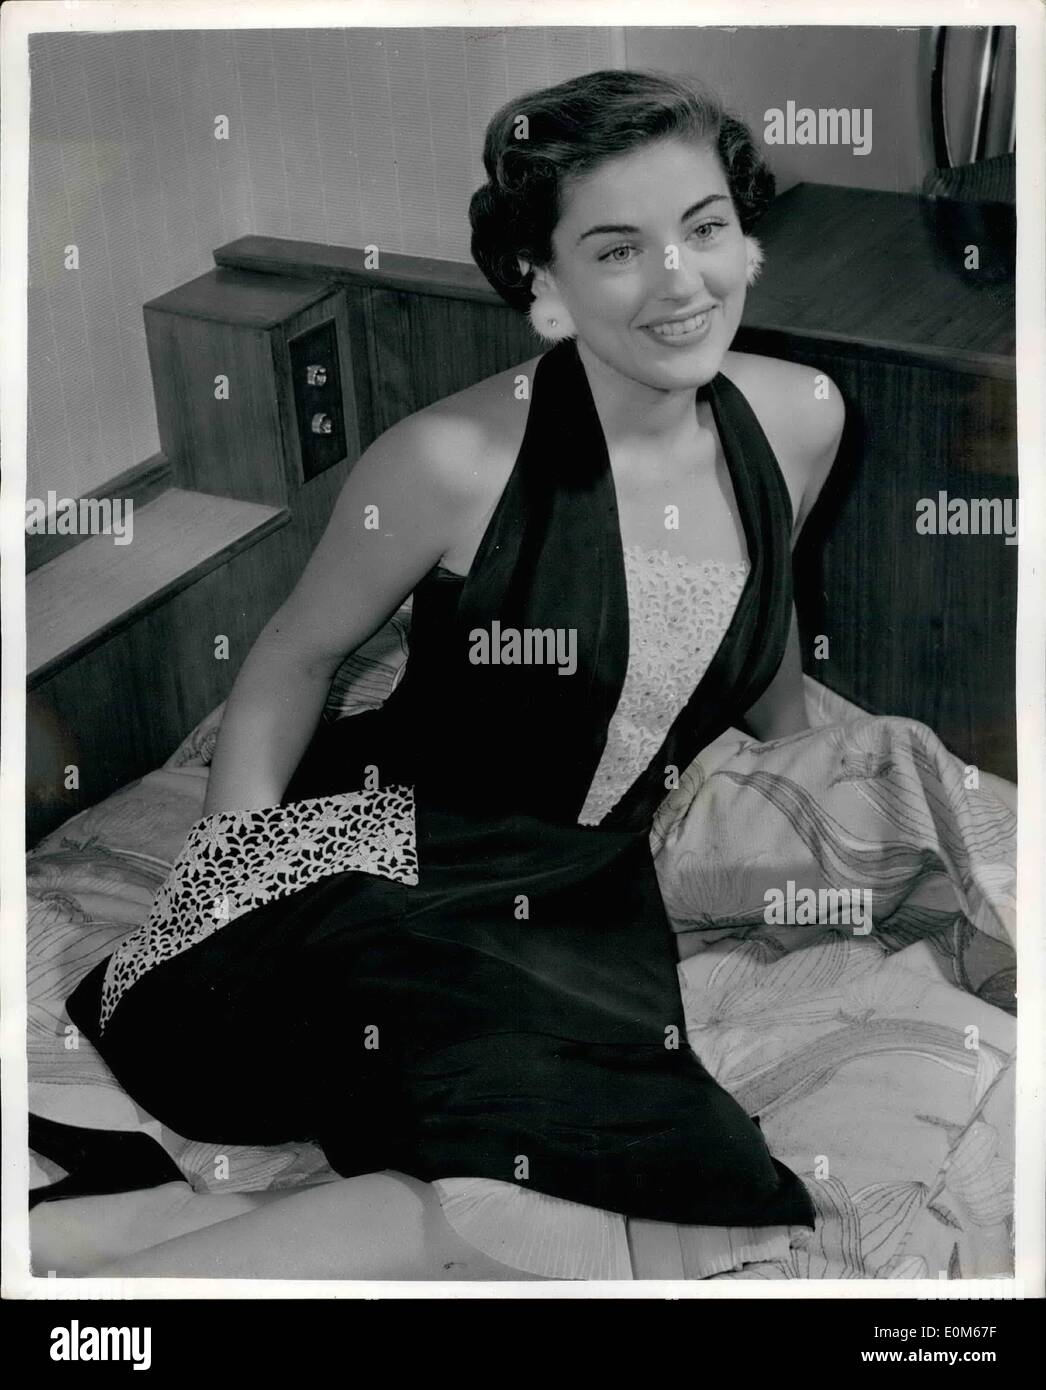 Sep. 09, 1953 - 3-D Actress Wears Mink Earnings: Photo Shows There's pride in her smile, The reason for it? Those tiny earnings Stock Photo